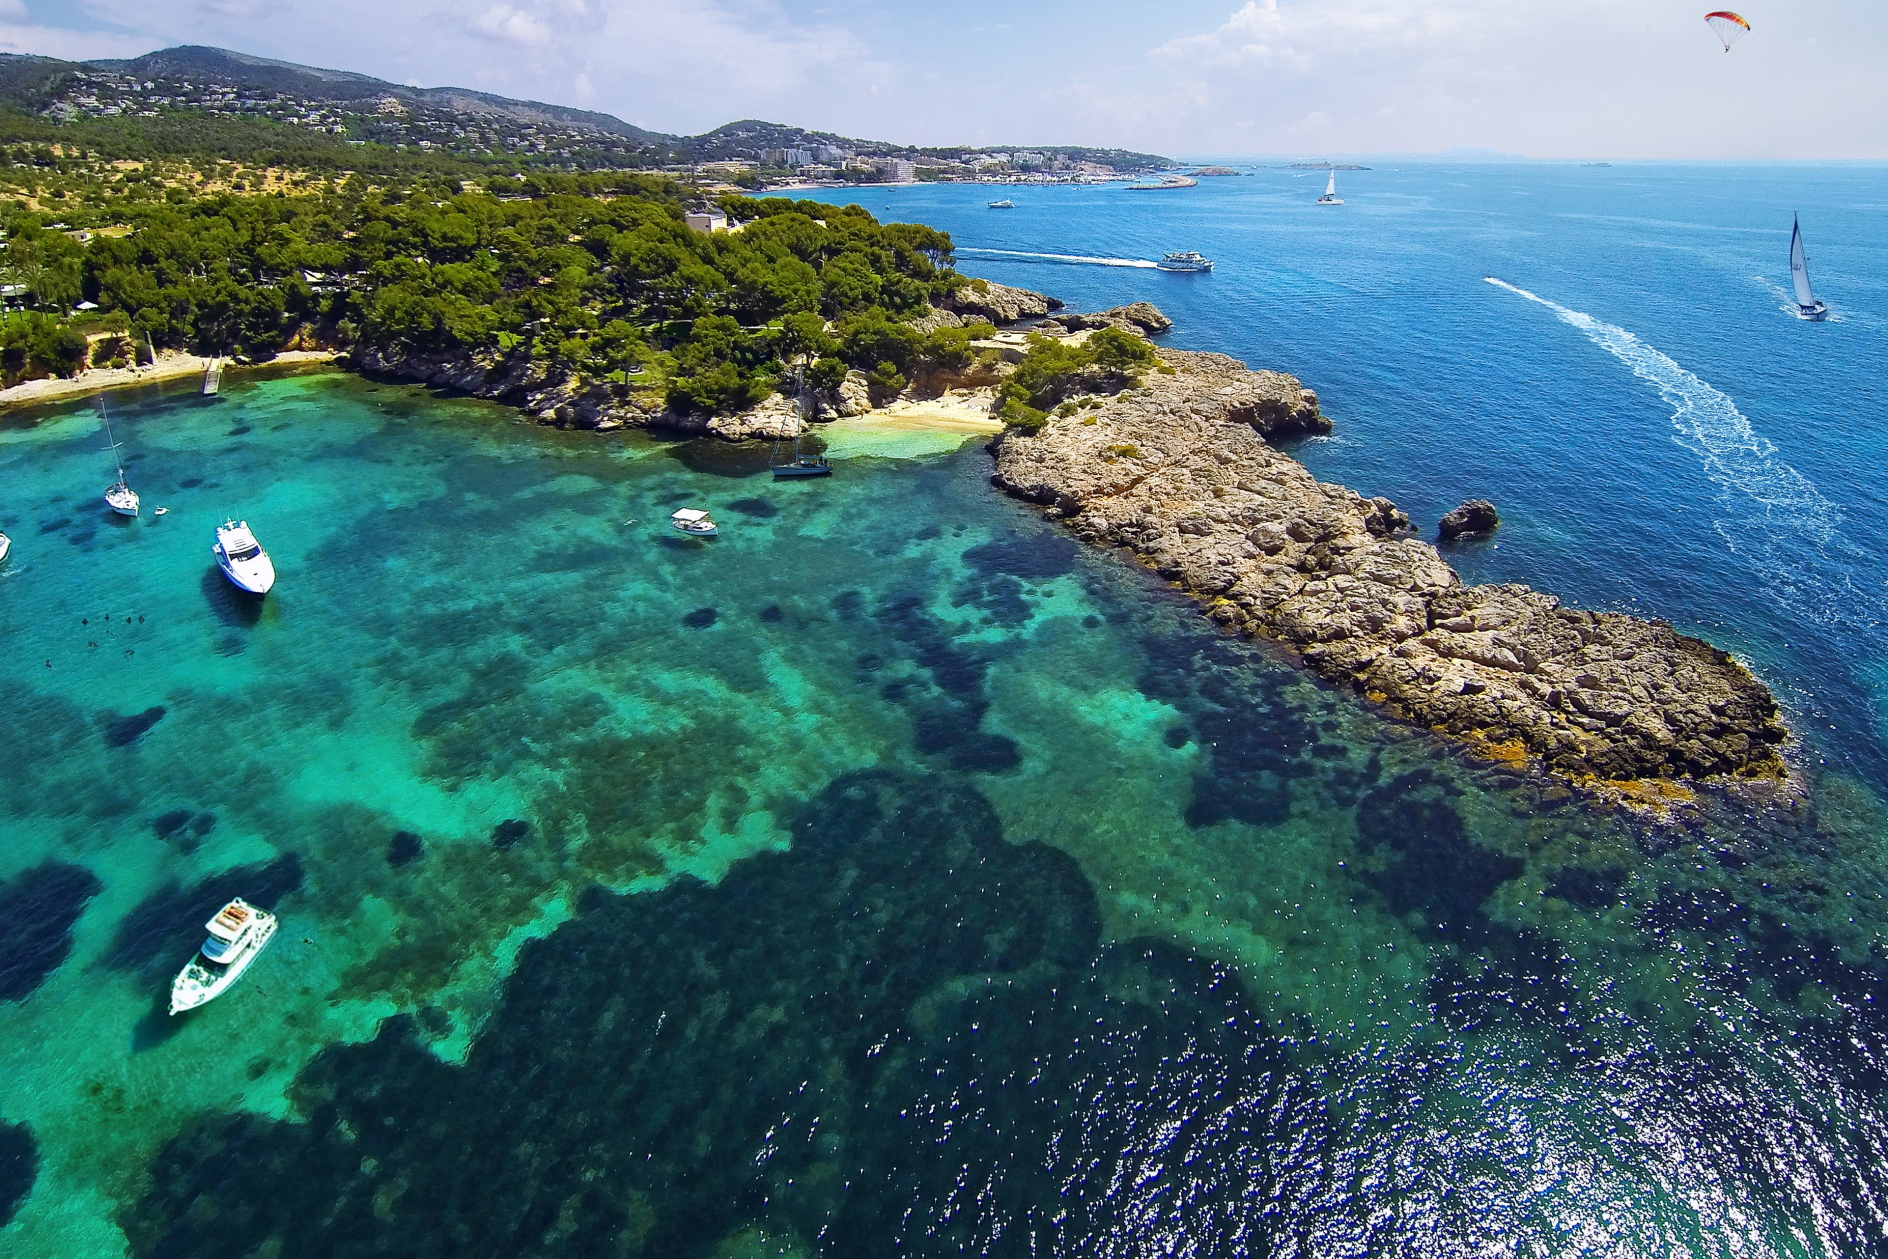 The Mandarin Oriental Punta Negra, Mallorca, is expected to open H2 2024. Click to enlarge.